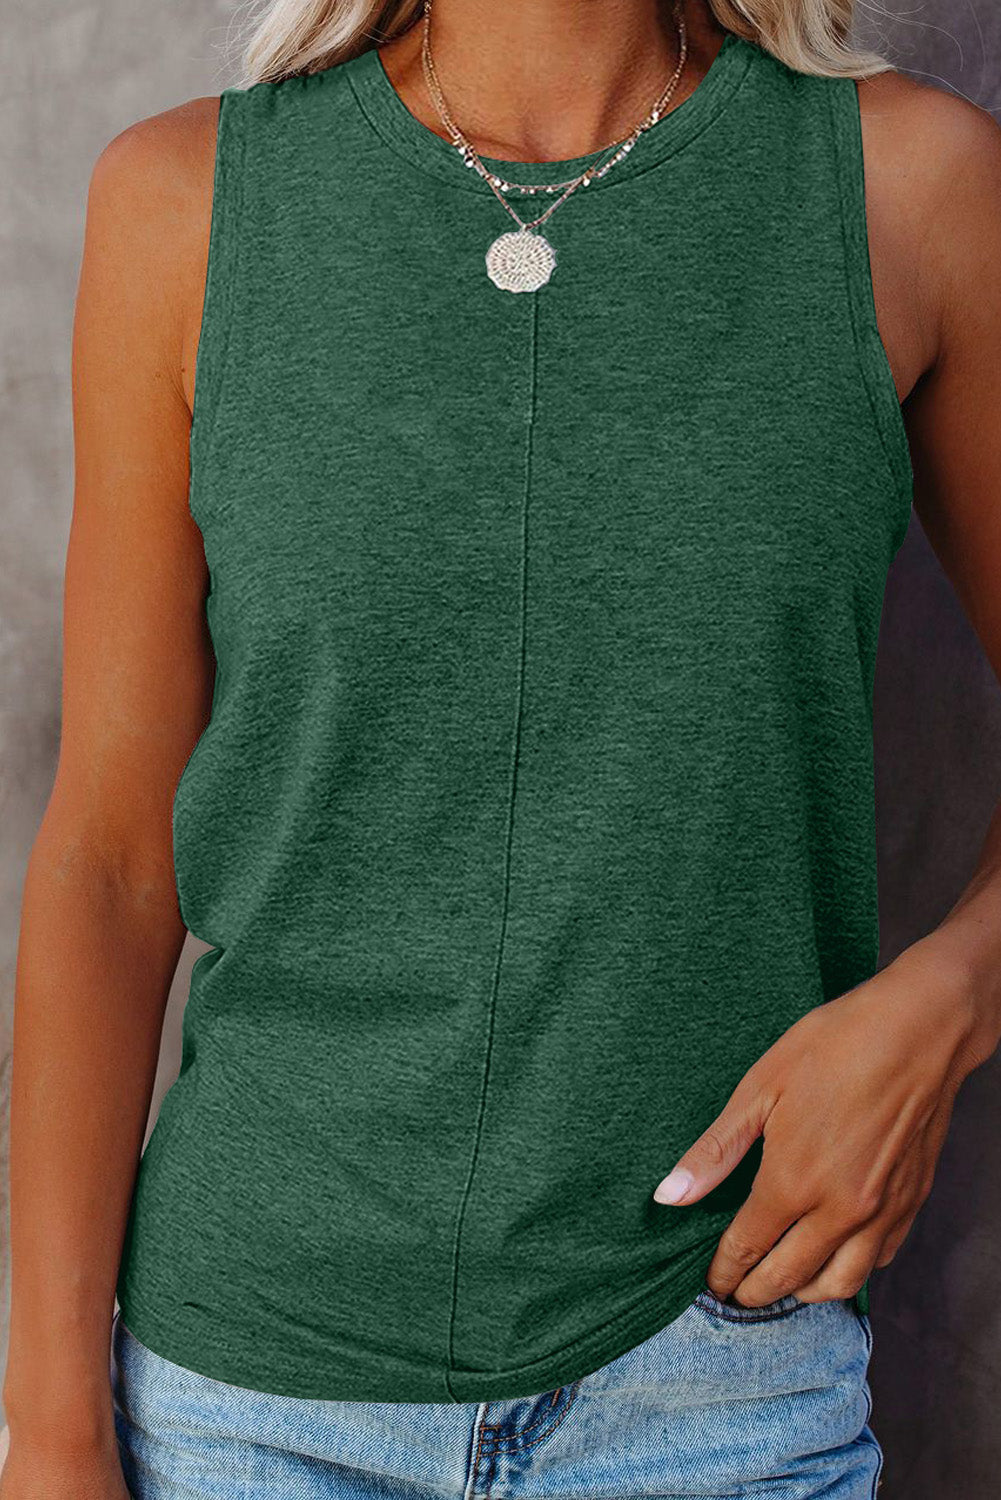 Solid Color Crewneck Sleeveless Top